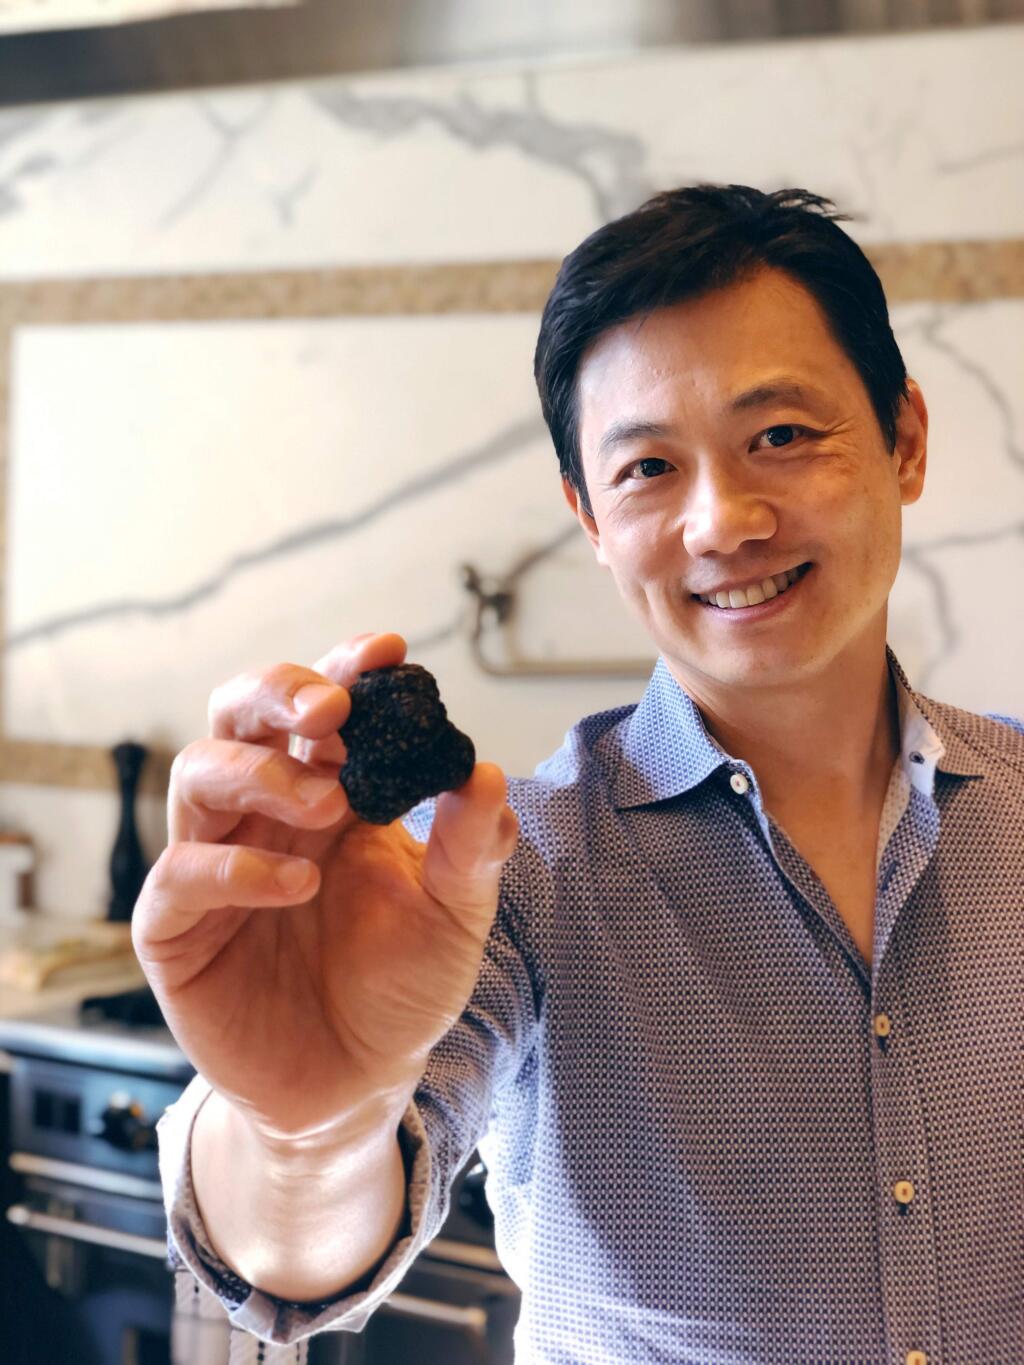 Robert Chang, managing director and chief truffle officer of the American Truffle Company. holds the first harvested Burgundy Black Truffle from the Otellini Truffle Orchard in Sonoma County using ATC's scientific cultivation technology. (American Truffle Company photo)